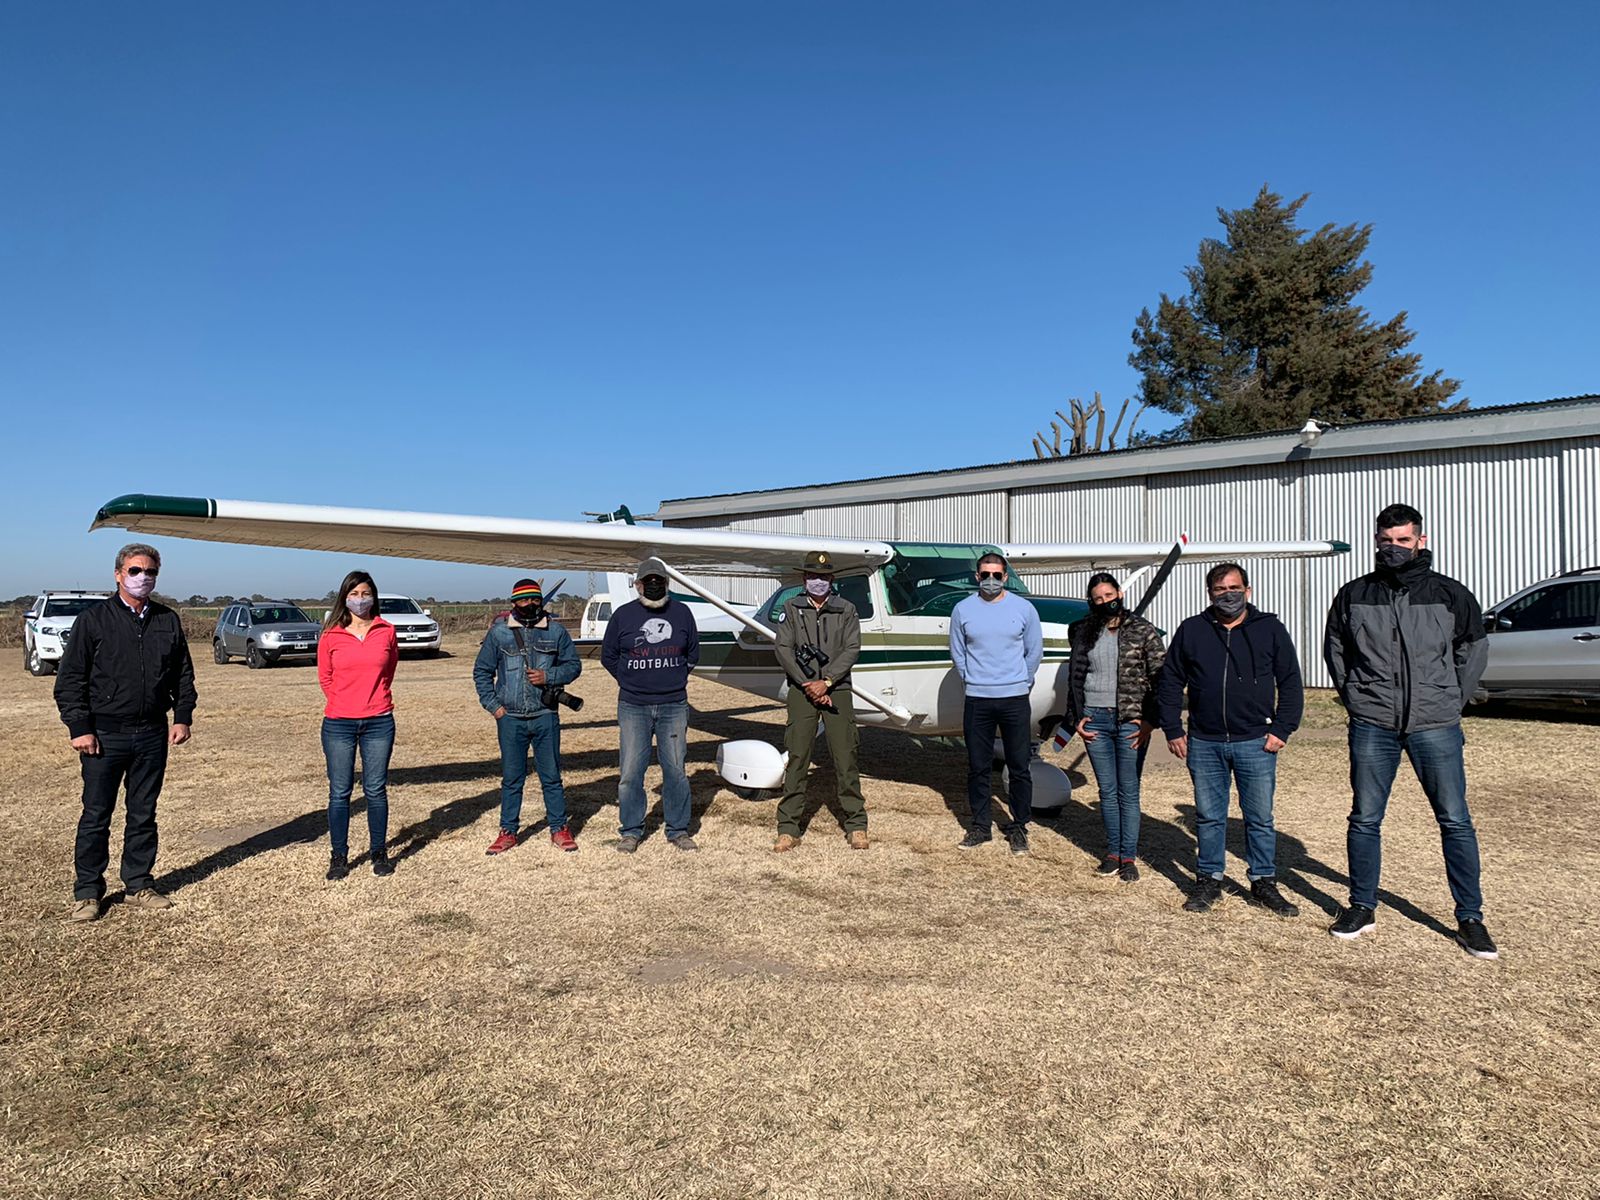 A team of eight people stand in front of a small plane